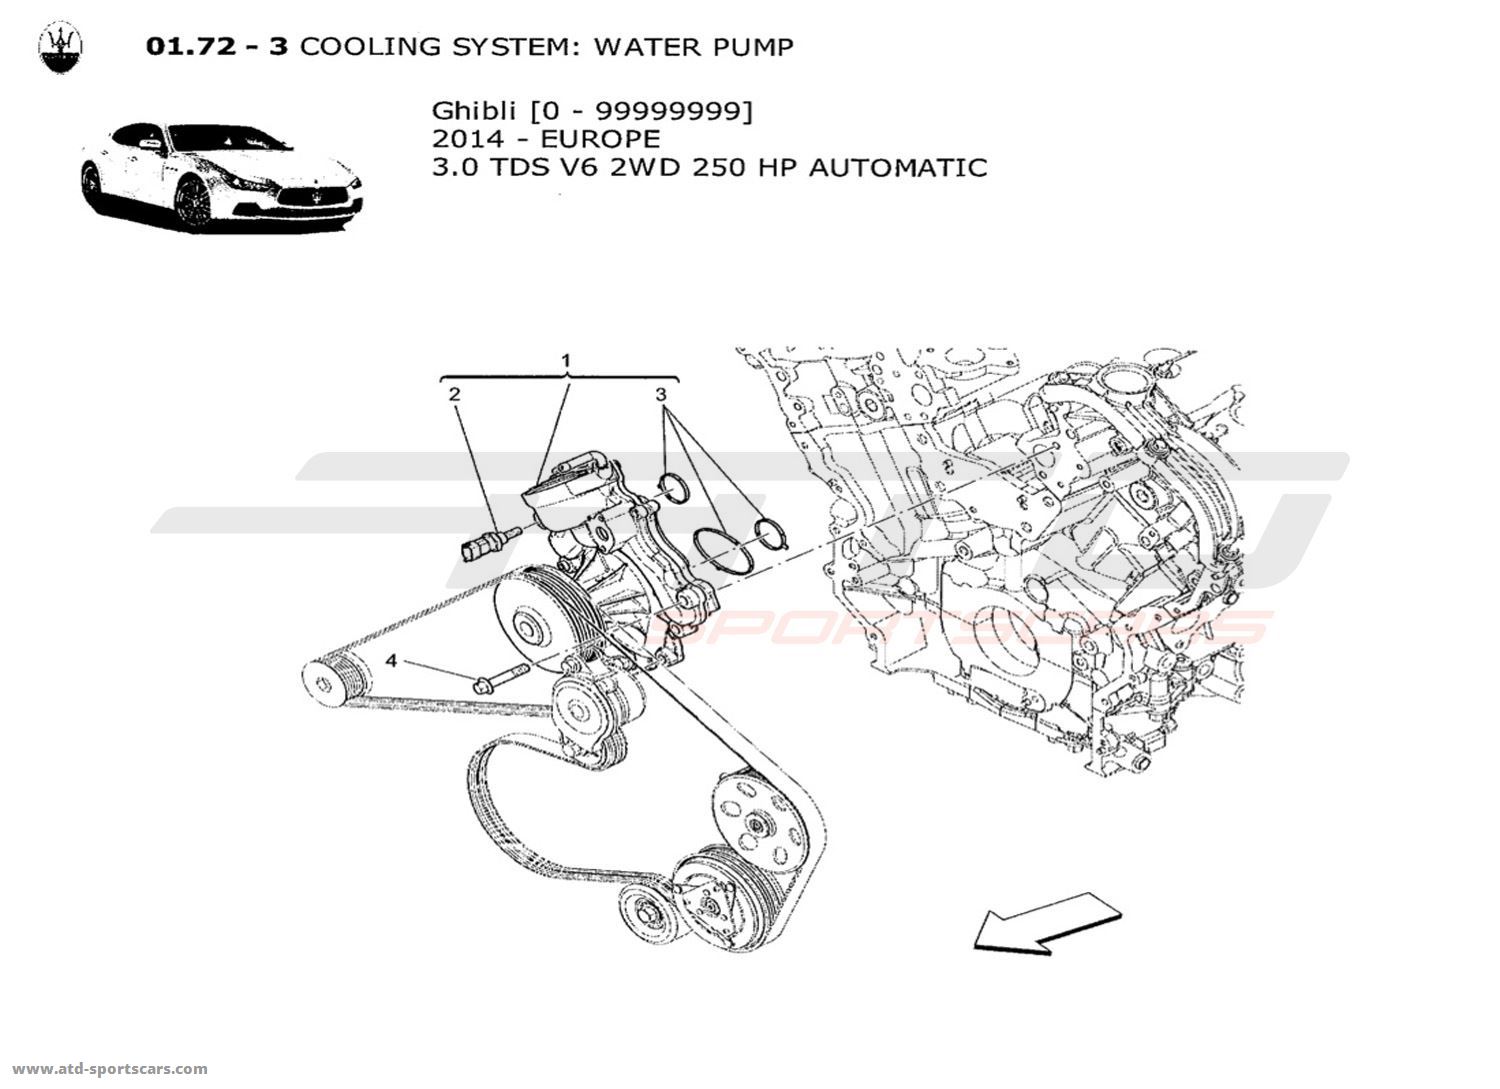 COOLING SYSTEM: WATER PUMP